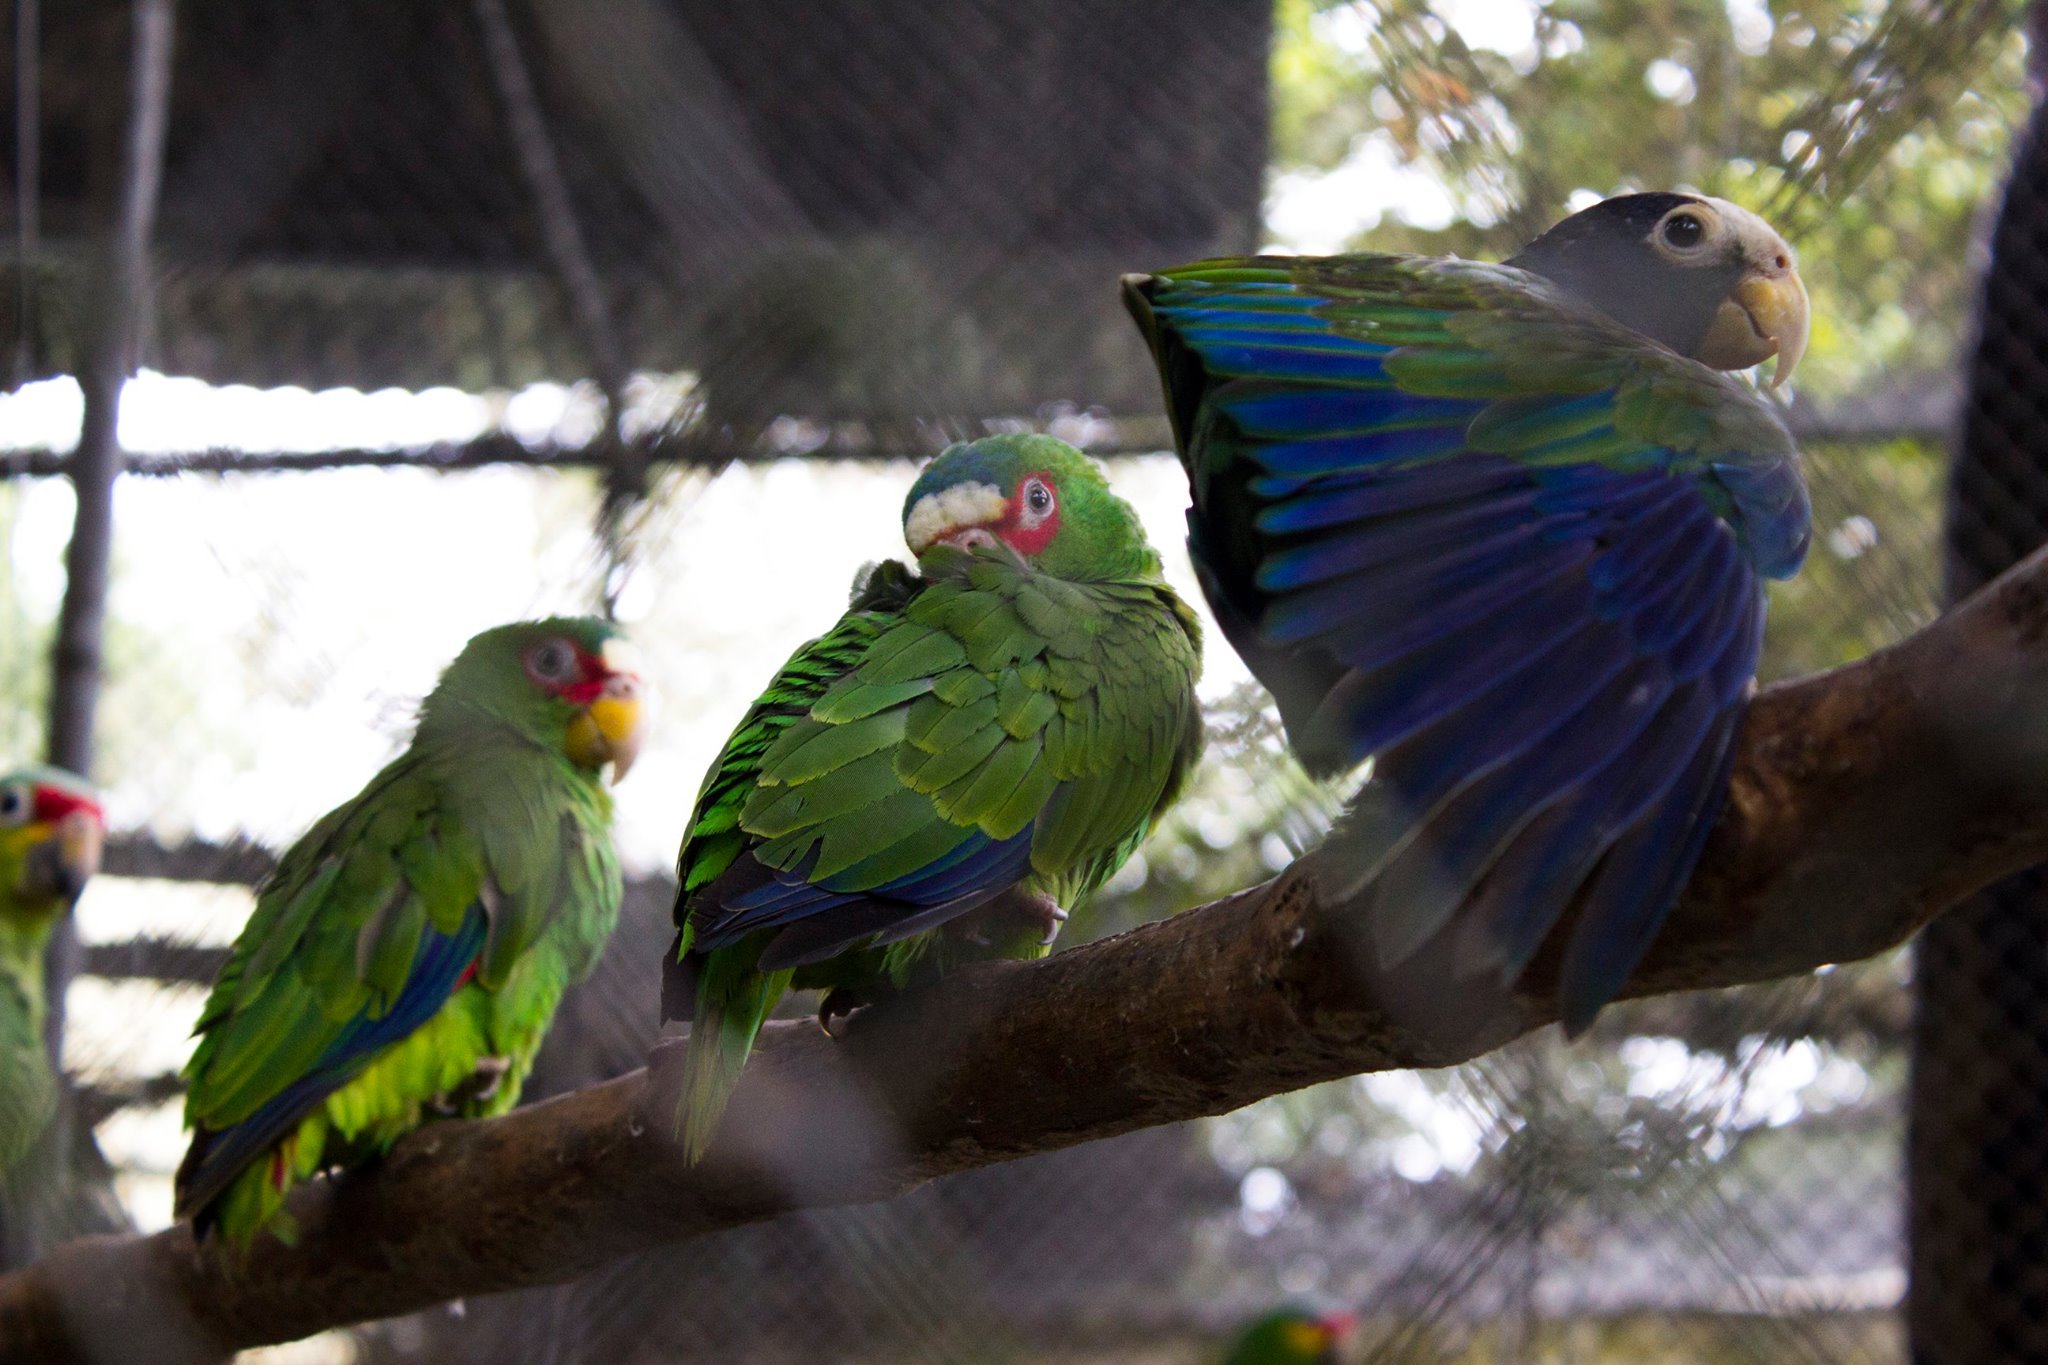  A group of tropical birds being rehabilitated. Many are exploited for their colorful plumage and are popular in the pet trade, endangering their populations in the wild. 